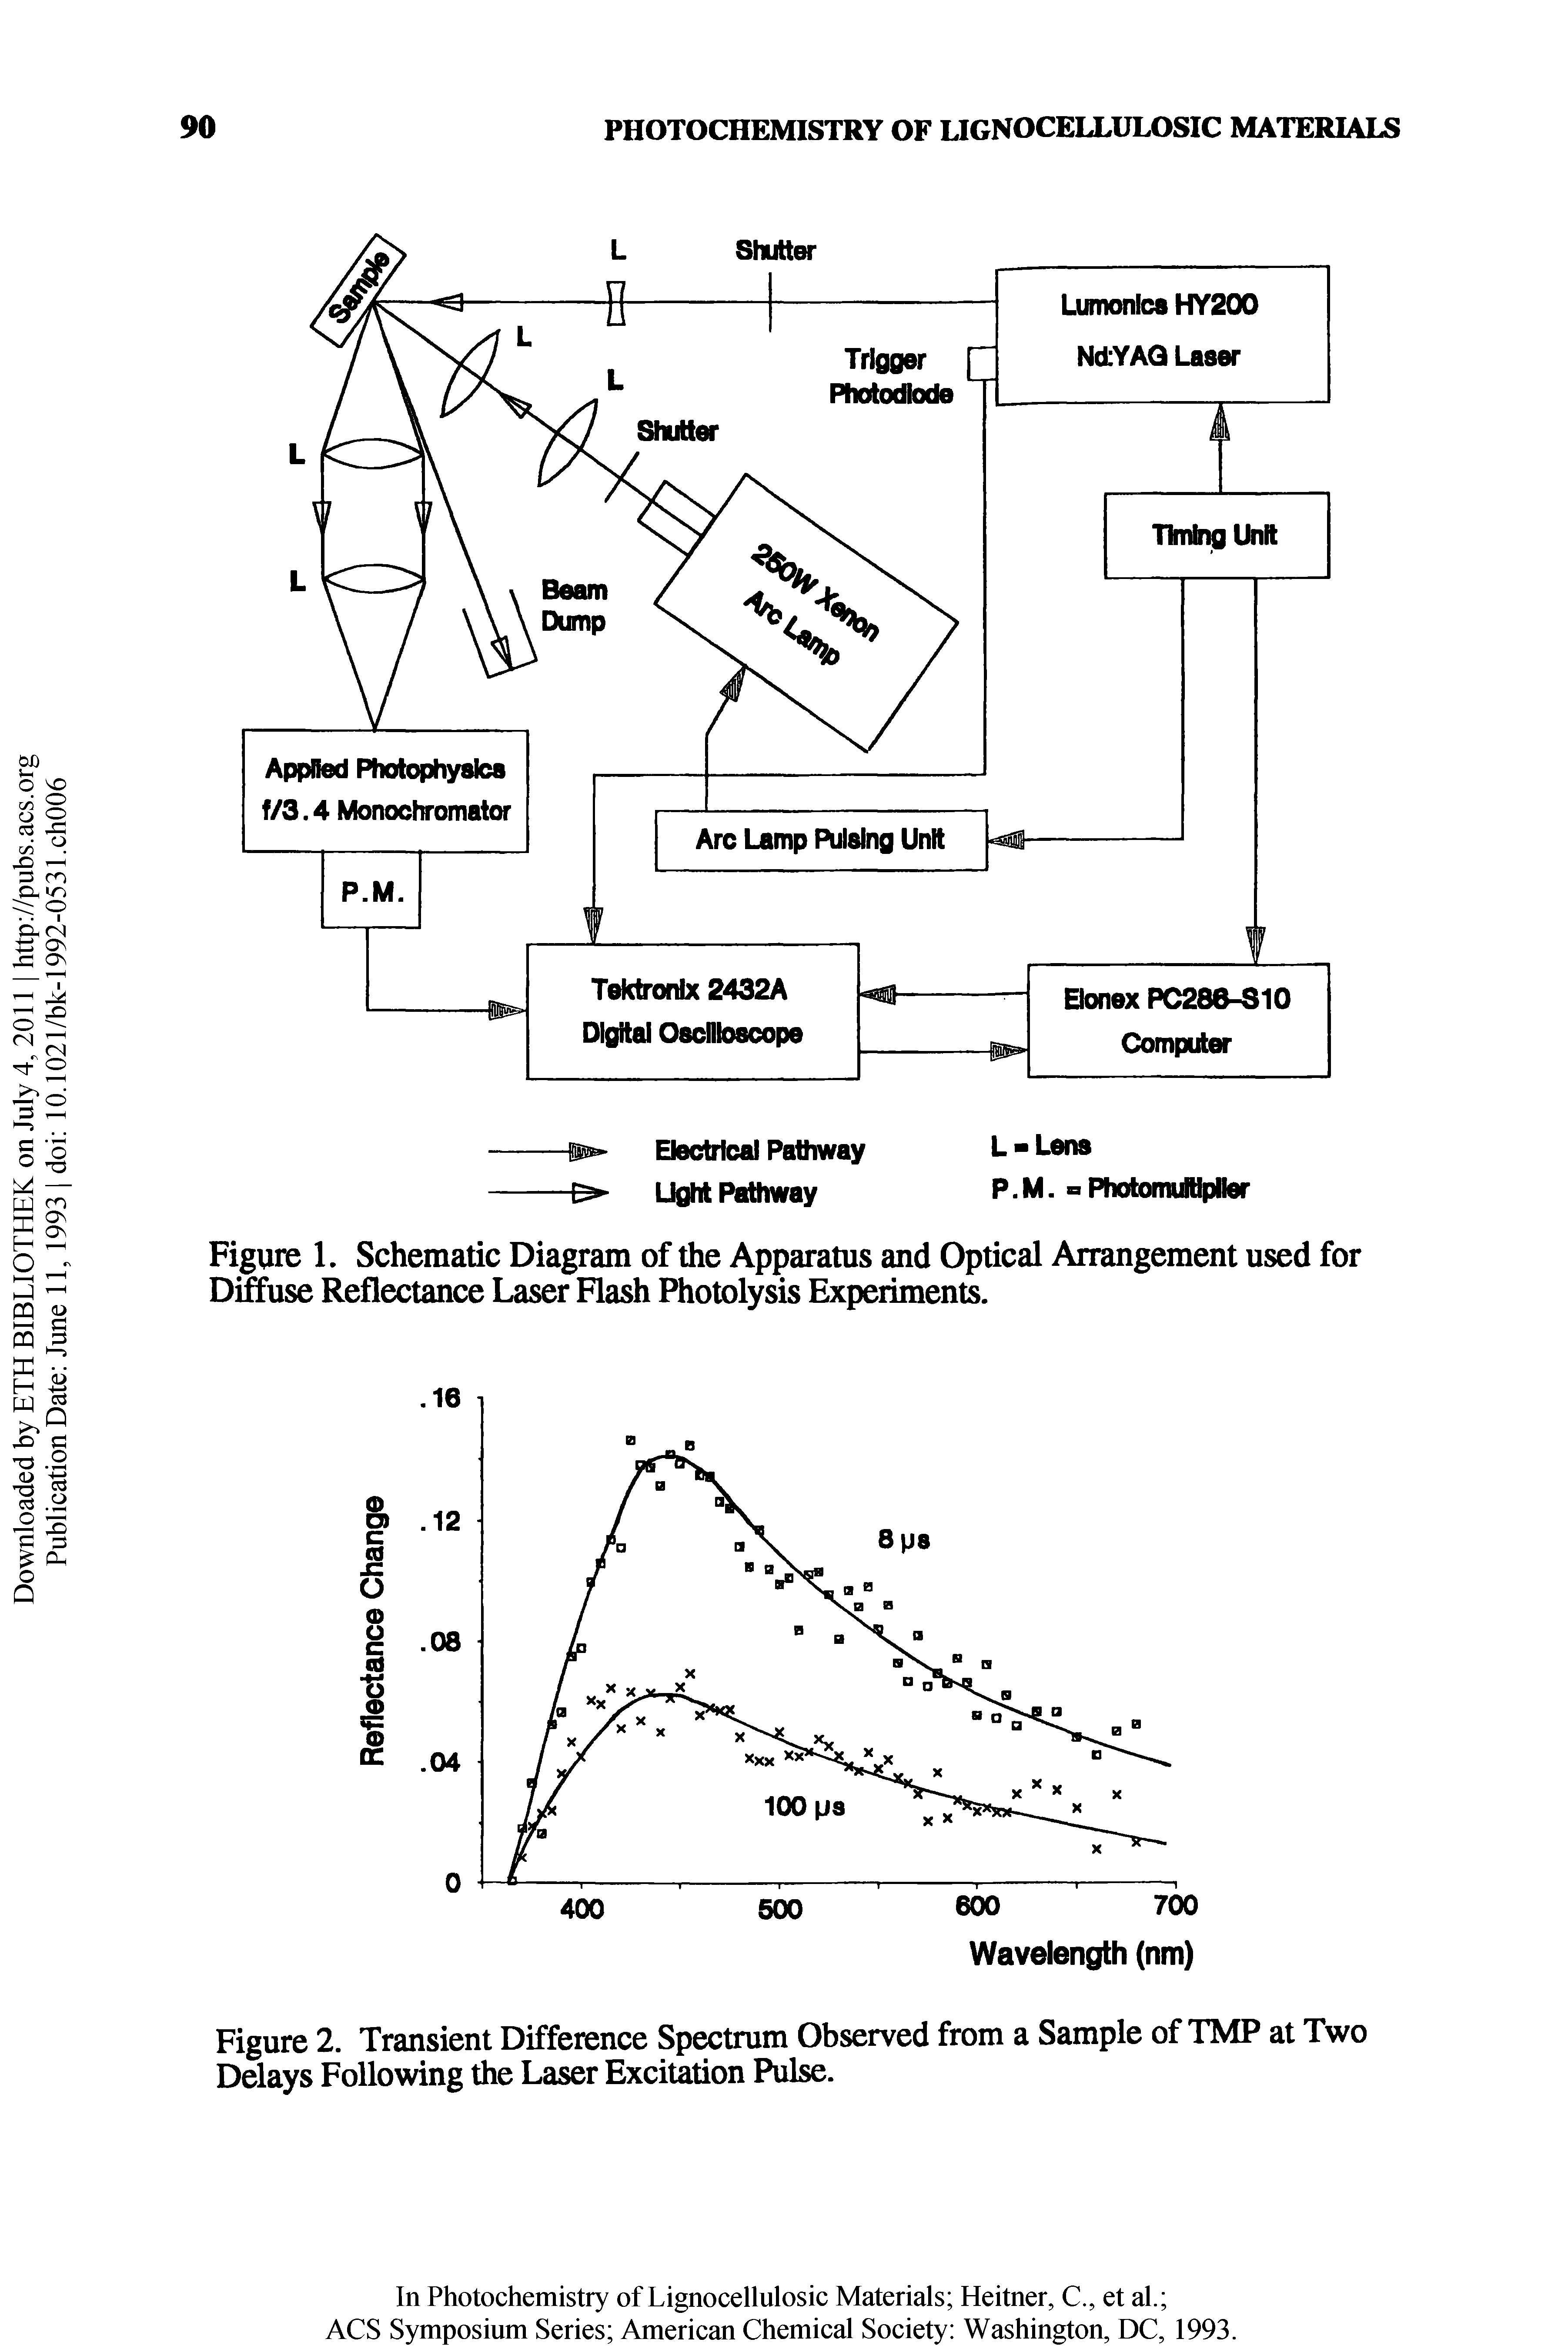 Figure 1. Schematic Diagram of the Apparatus and Optical Arrangement used for Diffuse Reflectance Laser Flash Photolysis Experiments.